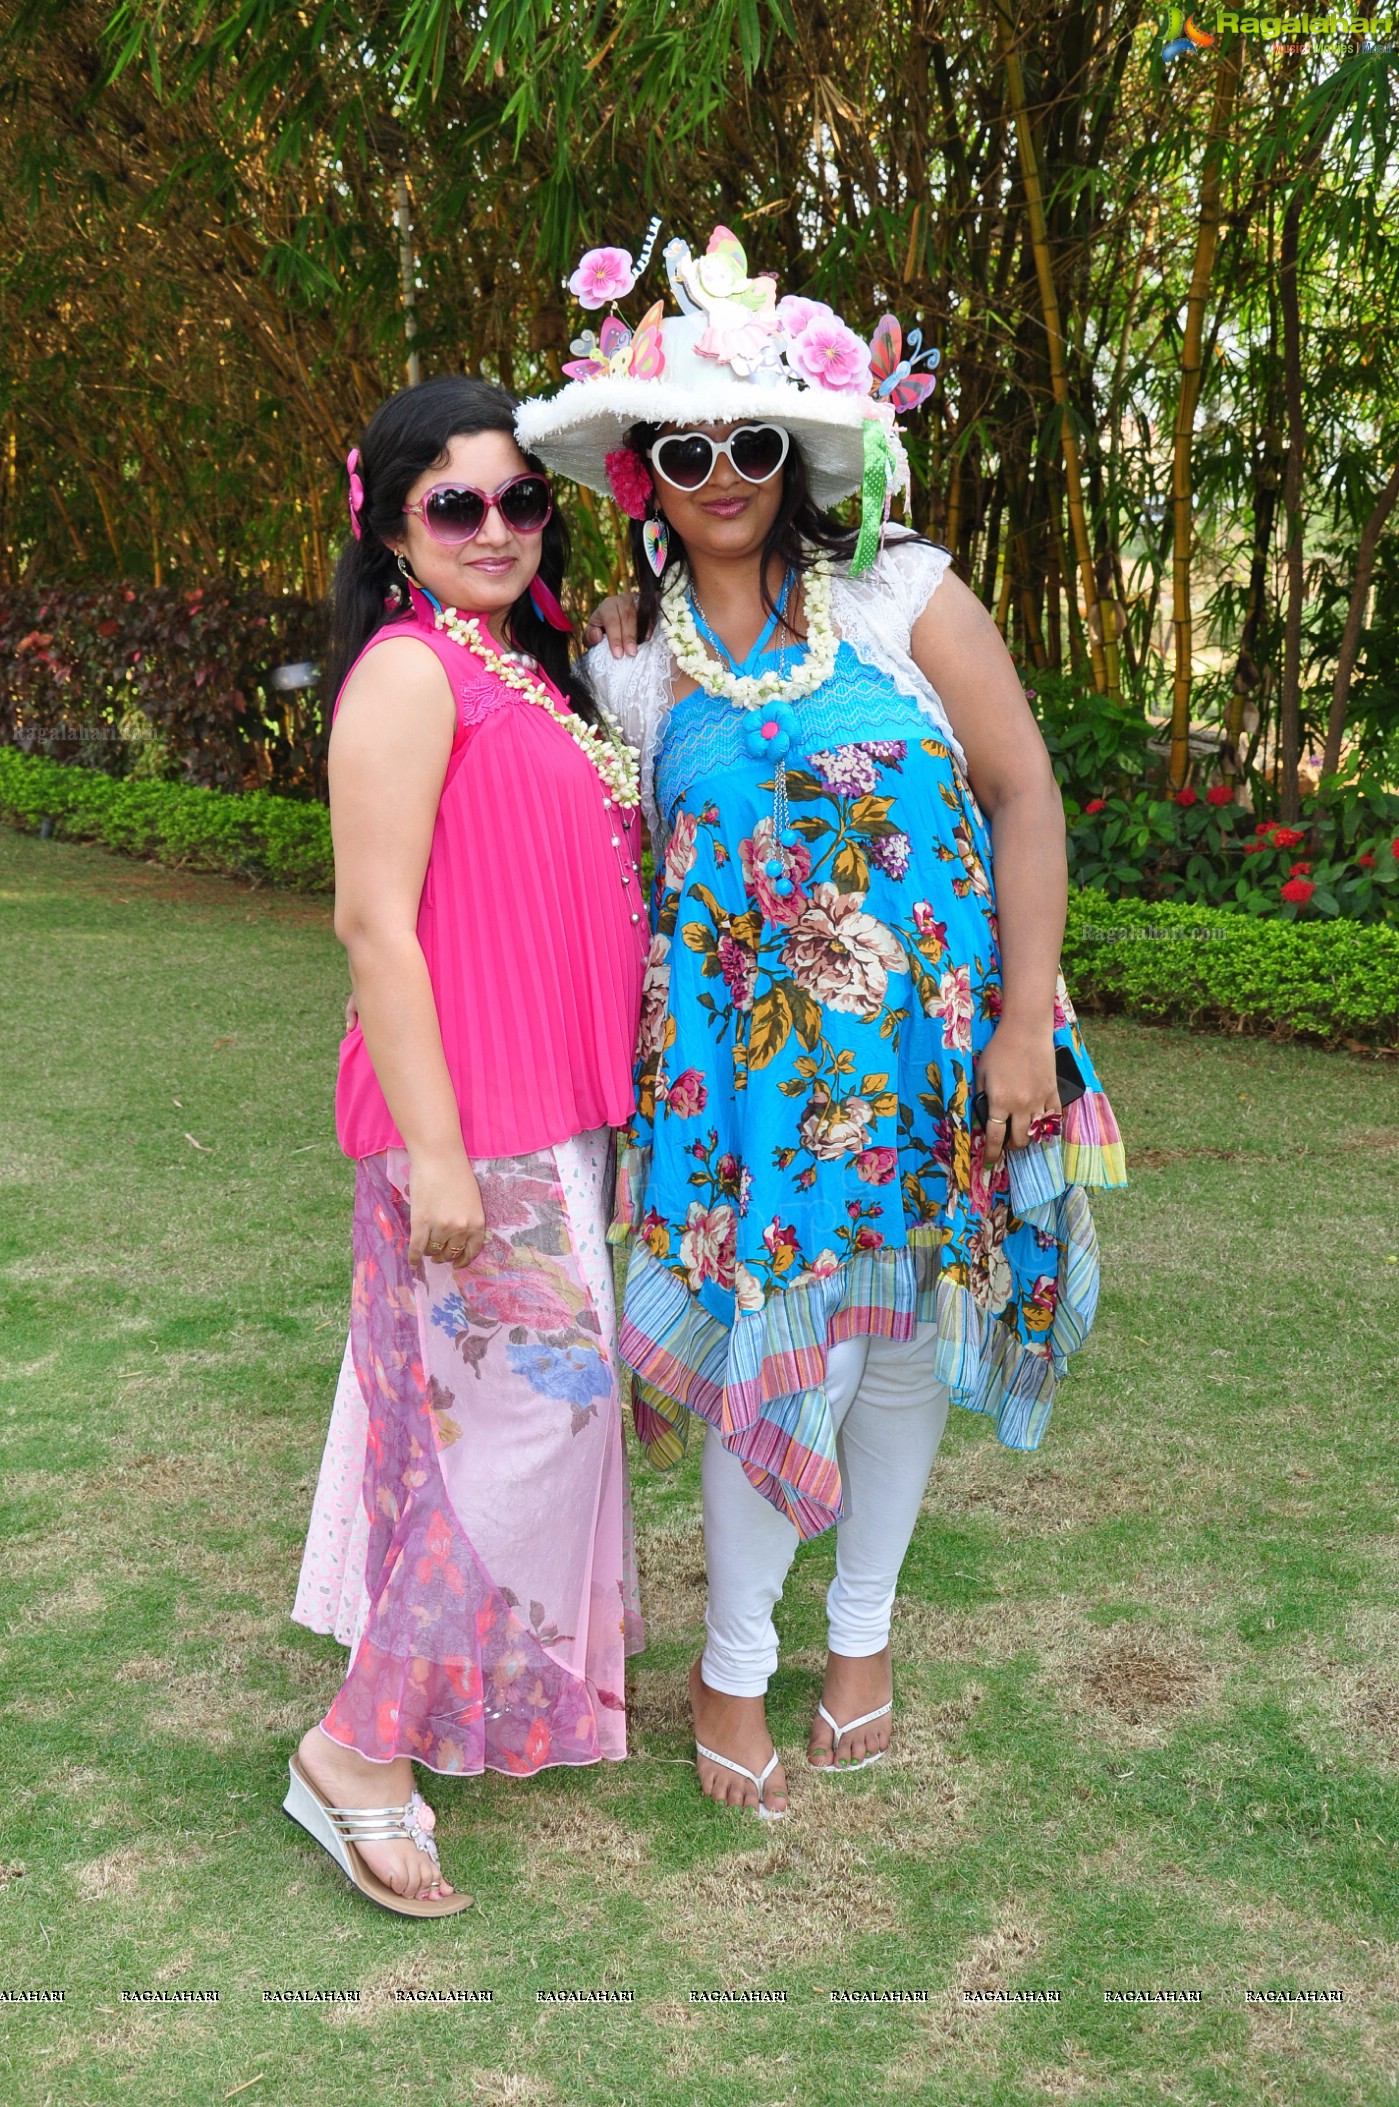 Mommy n Me Event at Novotel Hotel, Hyderabad